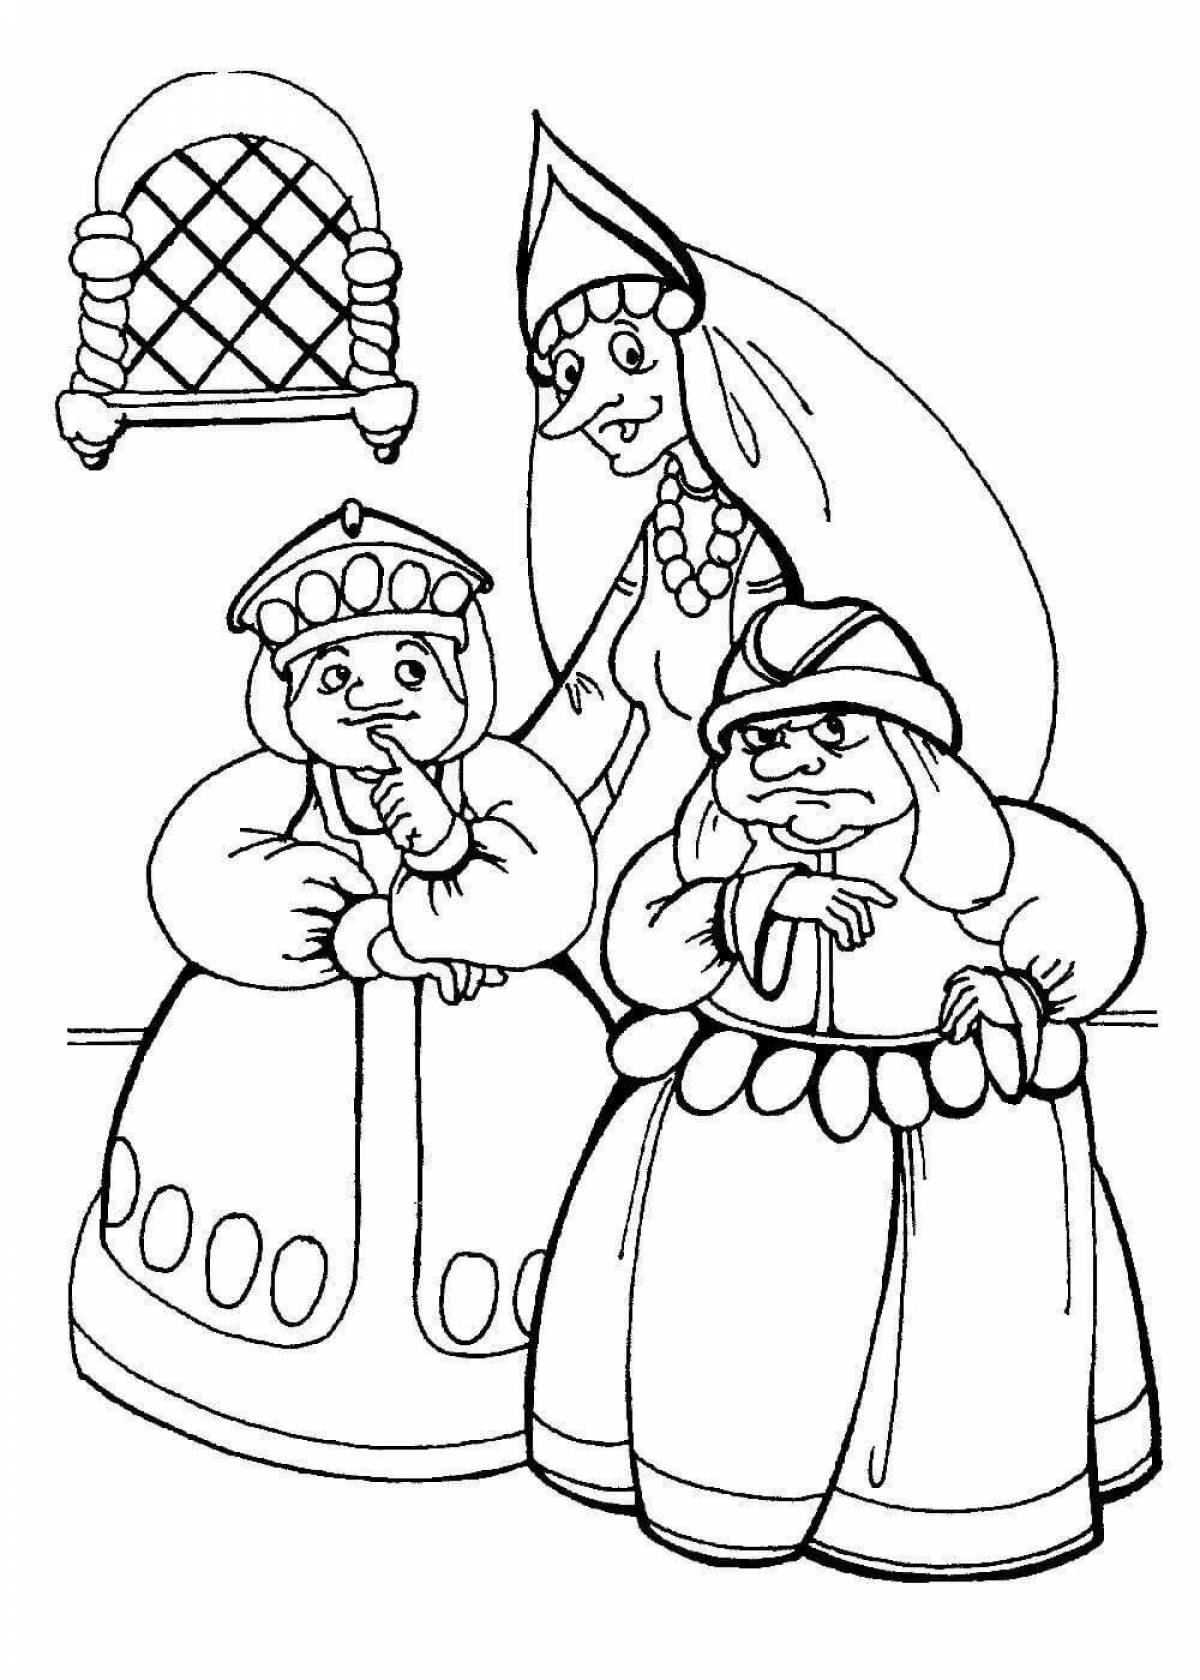 A funny coloring book based on Pushkin's fairy tales